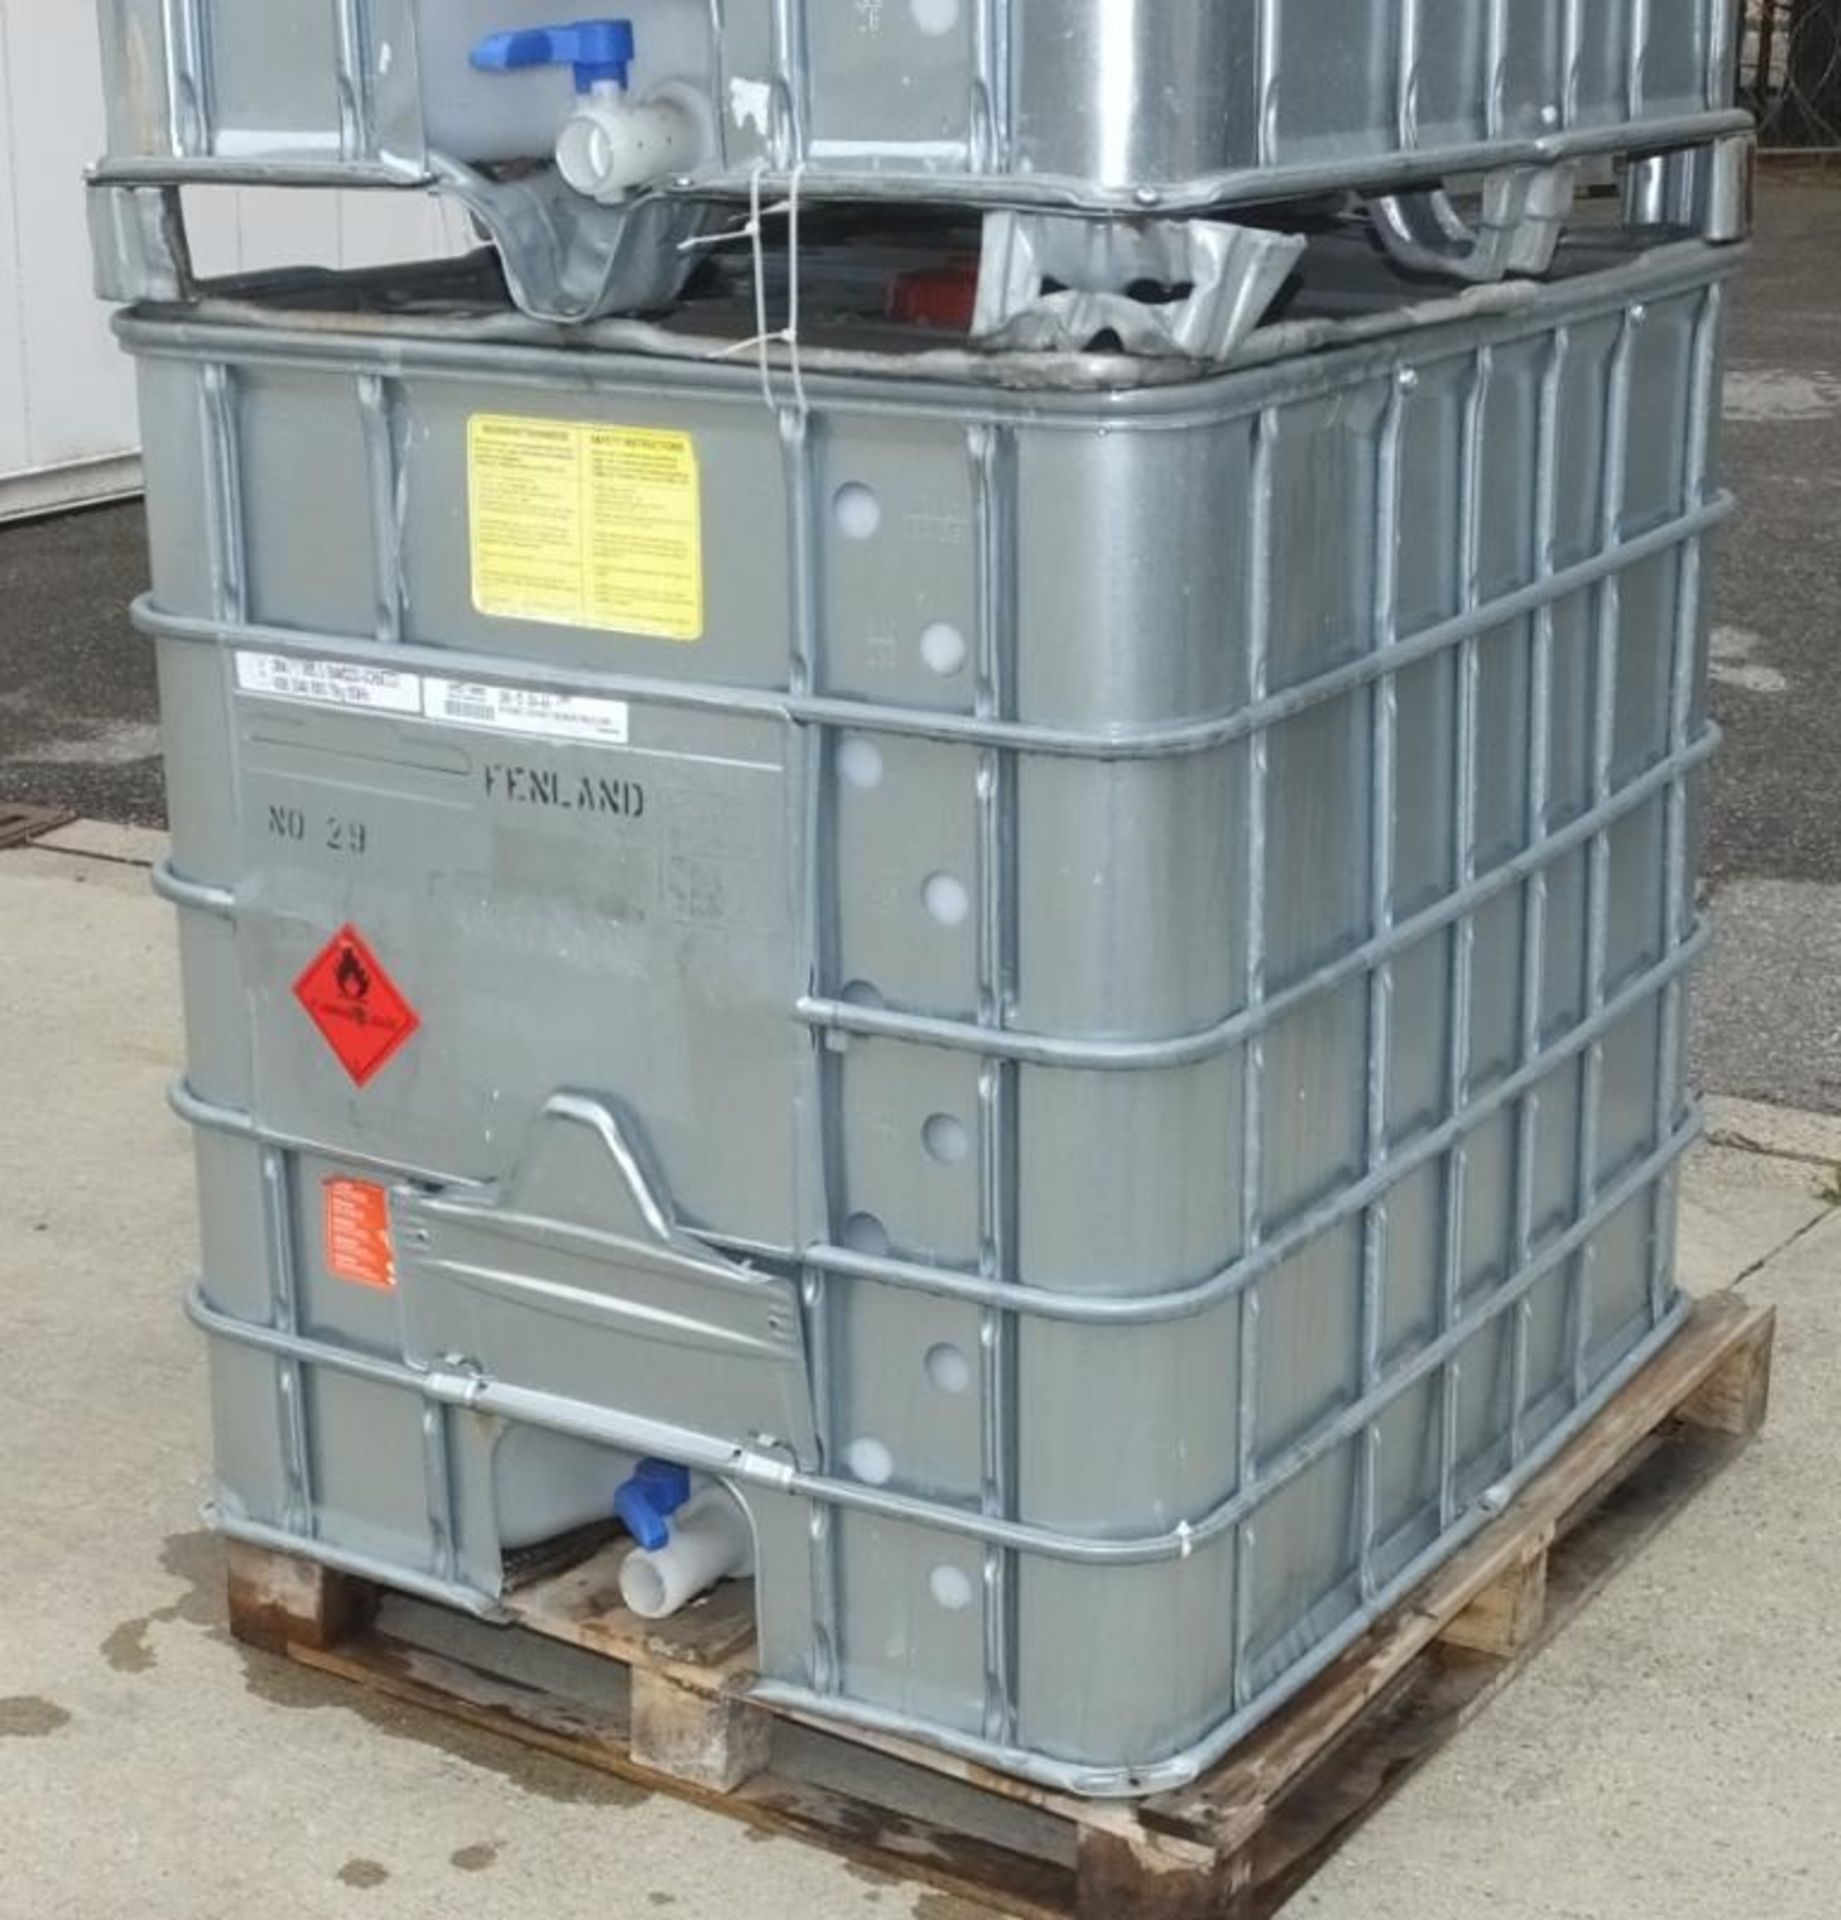 2x Schutz SX EX metal clad and frame IBC 1000LTR plastic containers - Image 2 of 4